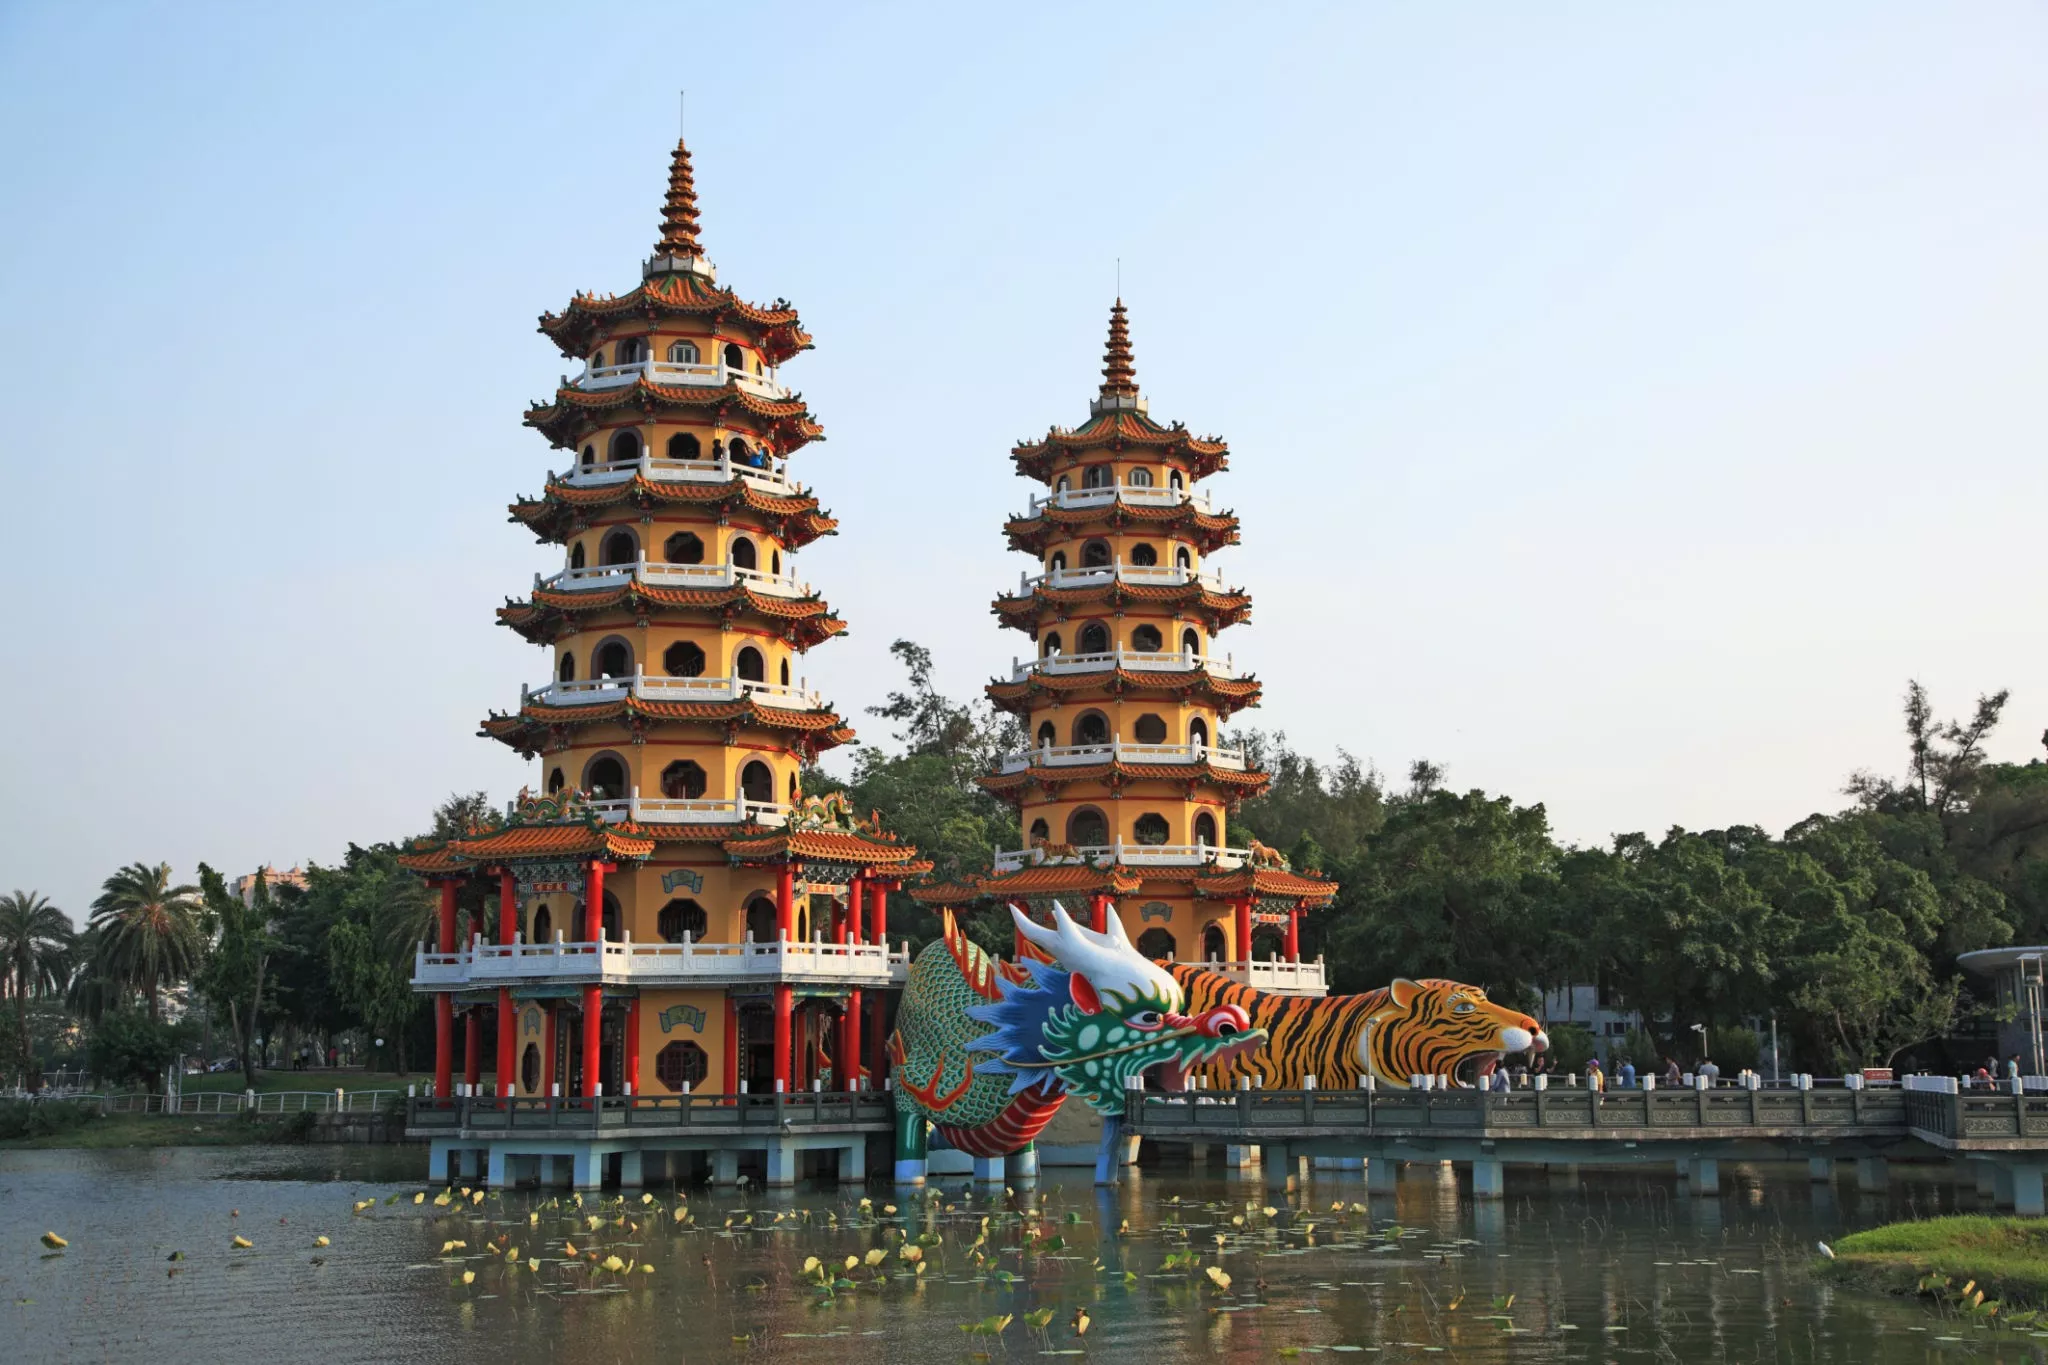 Pagodas "Dragon" and "Tiger" in Taiwan, East Asia | Architecture - Rated 3.7